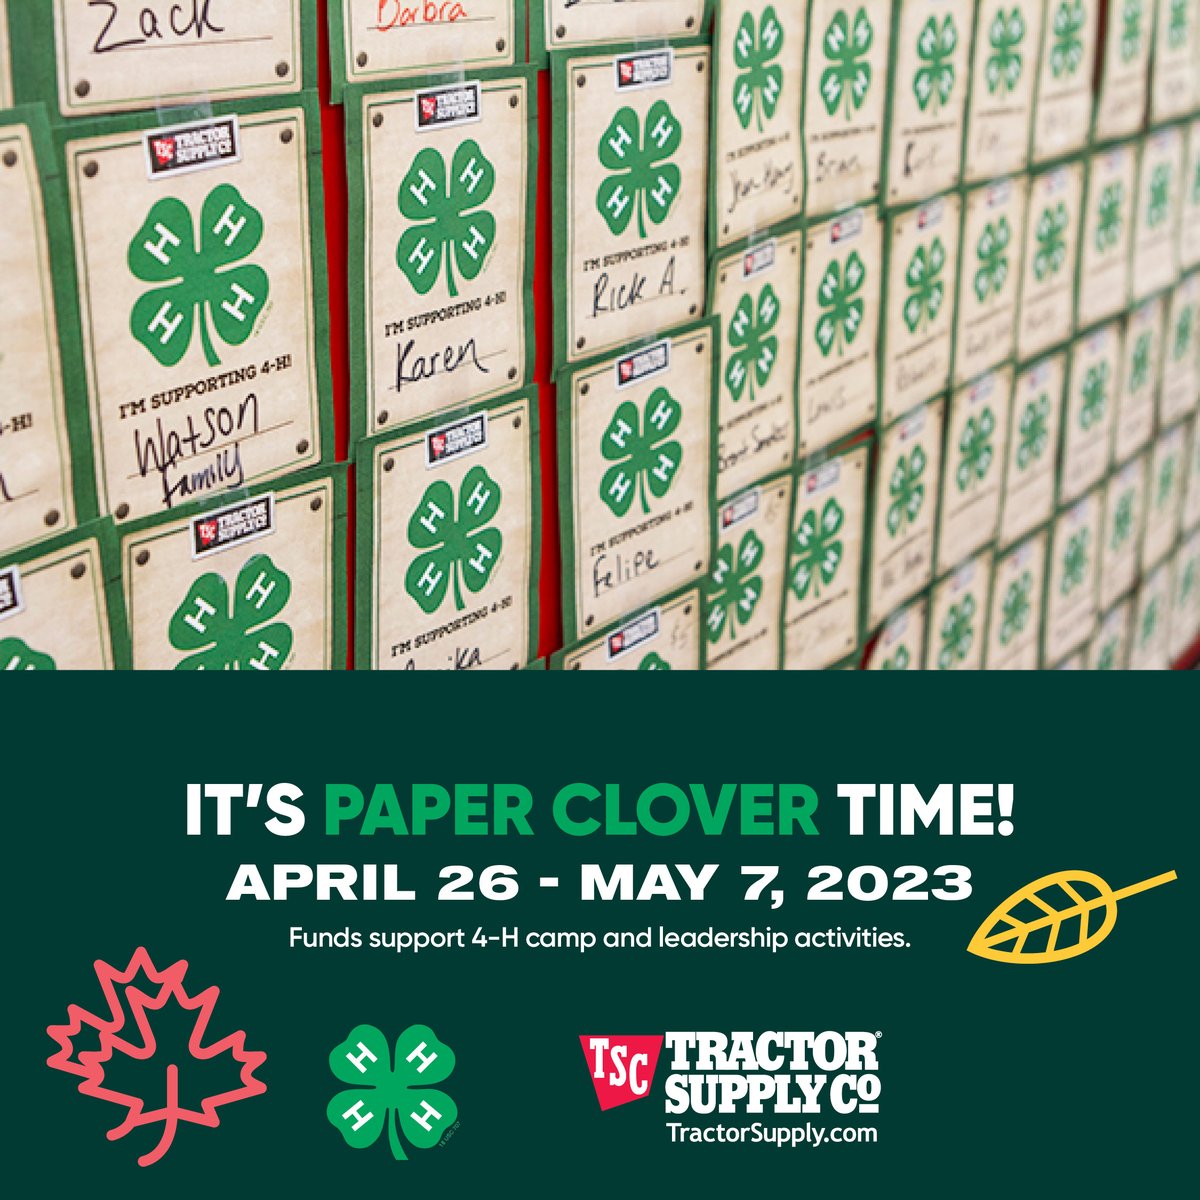 Show your #Marylandpride and love of #4H - purchase a Paper Clover at @TractorSupply now through May 7th! 90% of all proceeds go directly towards OUR state & LOCAL programs to support leadership skills, virtual camps, and more! Get a #4HPaperClover today! 🍀